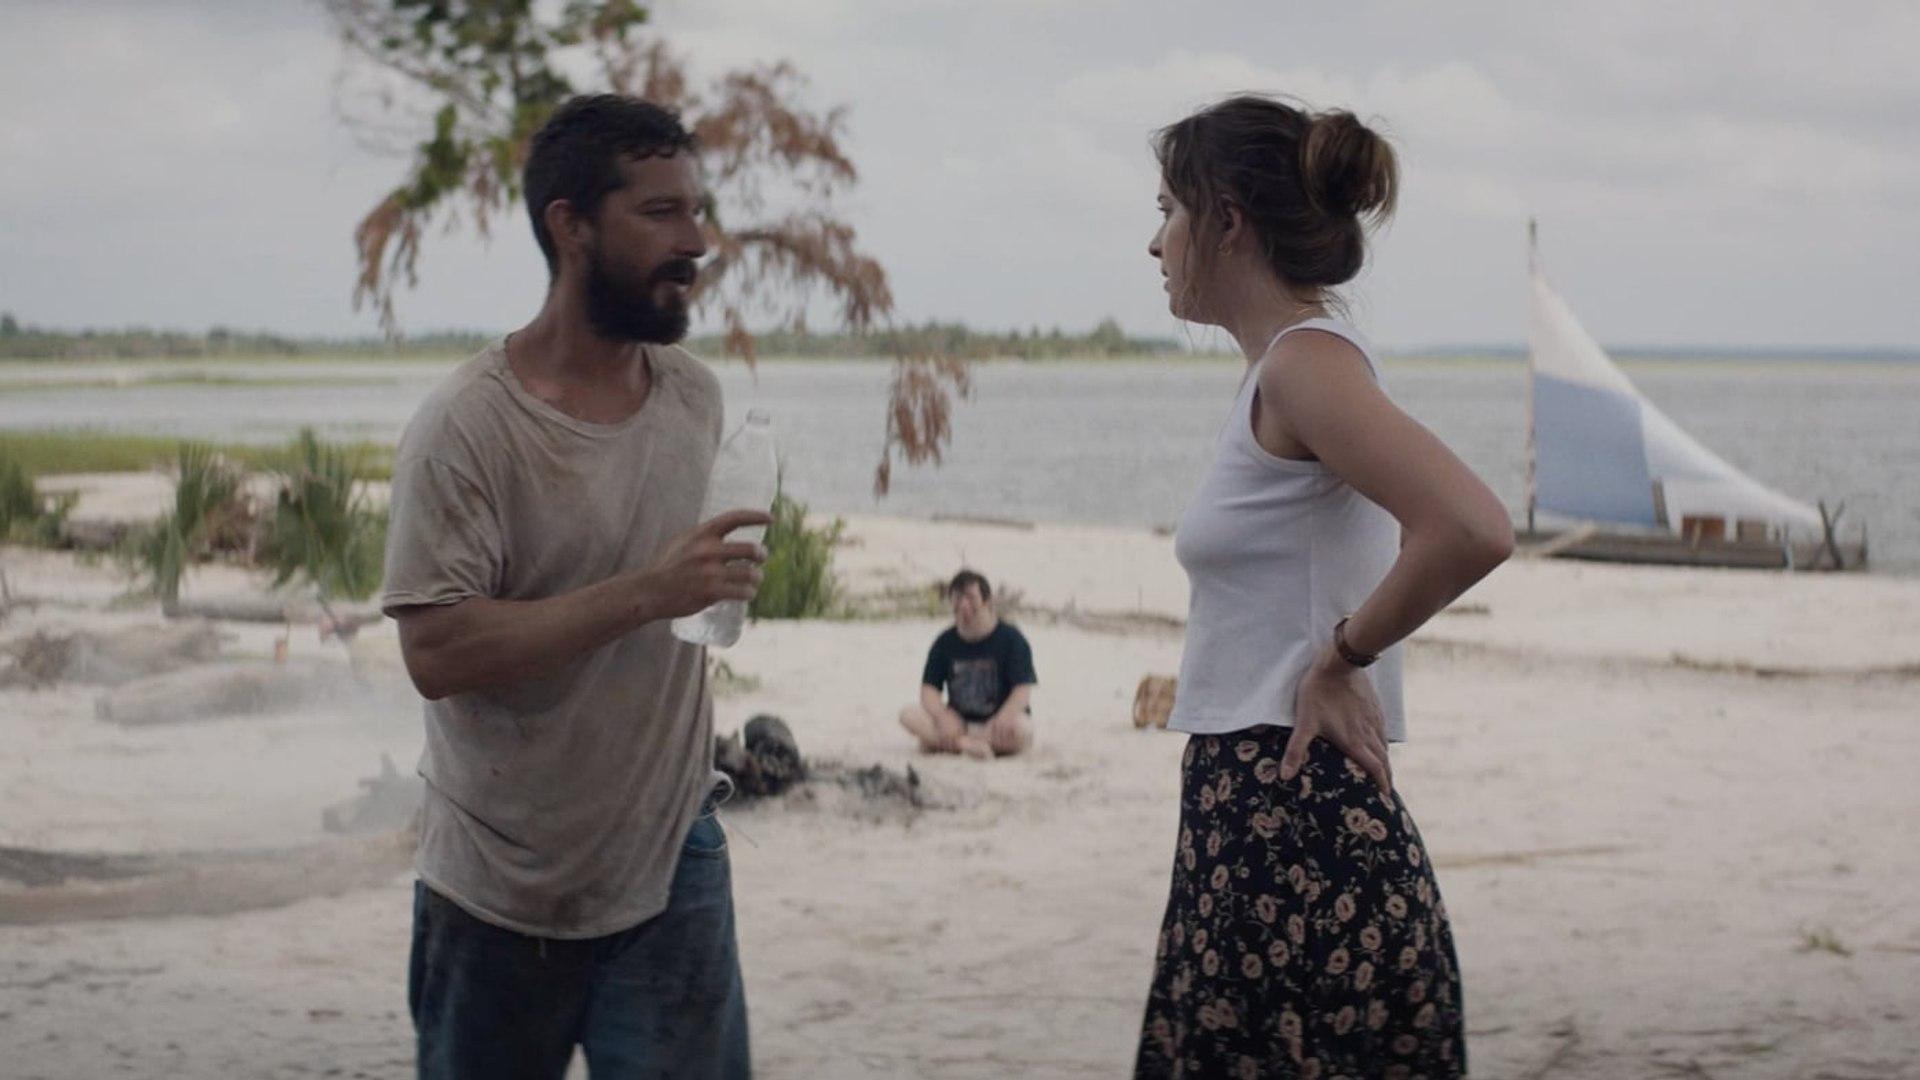 Watch Shia LaBeouf and Dakota Johnson in an Exclusive Scene From The Peanut Butter Falcon